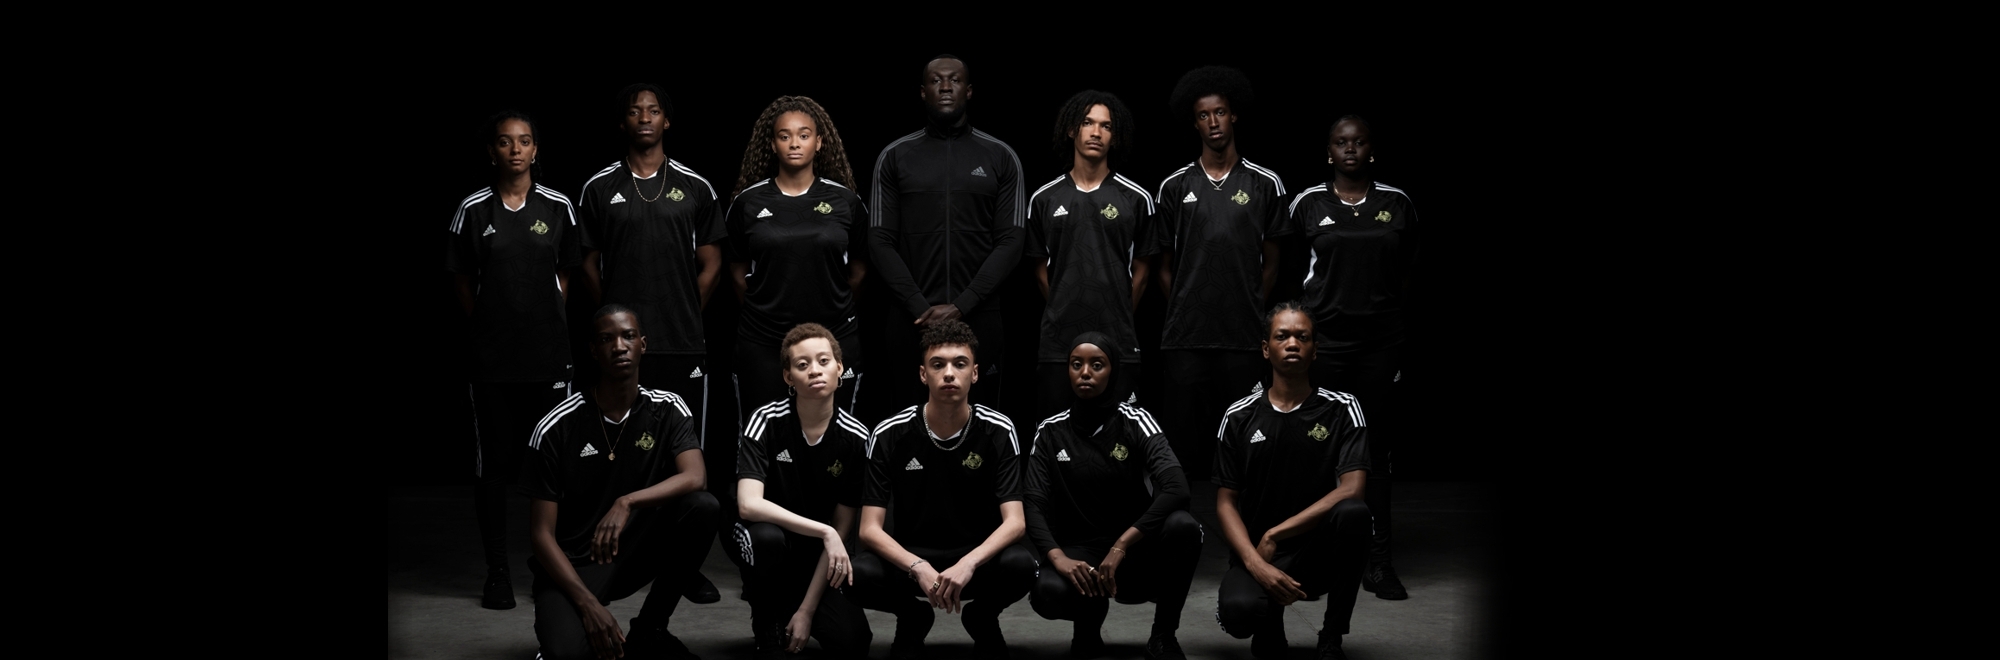 adidas and Stormzy announce the launch of #Merky FC